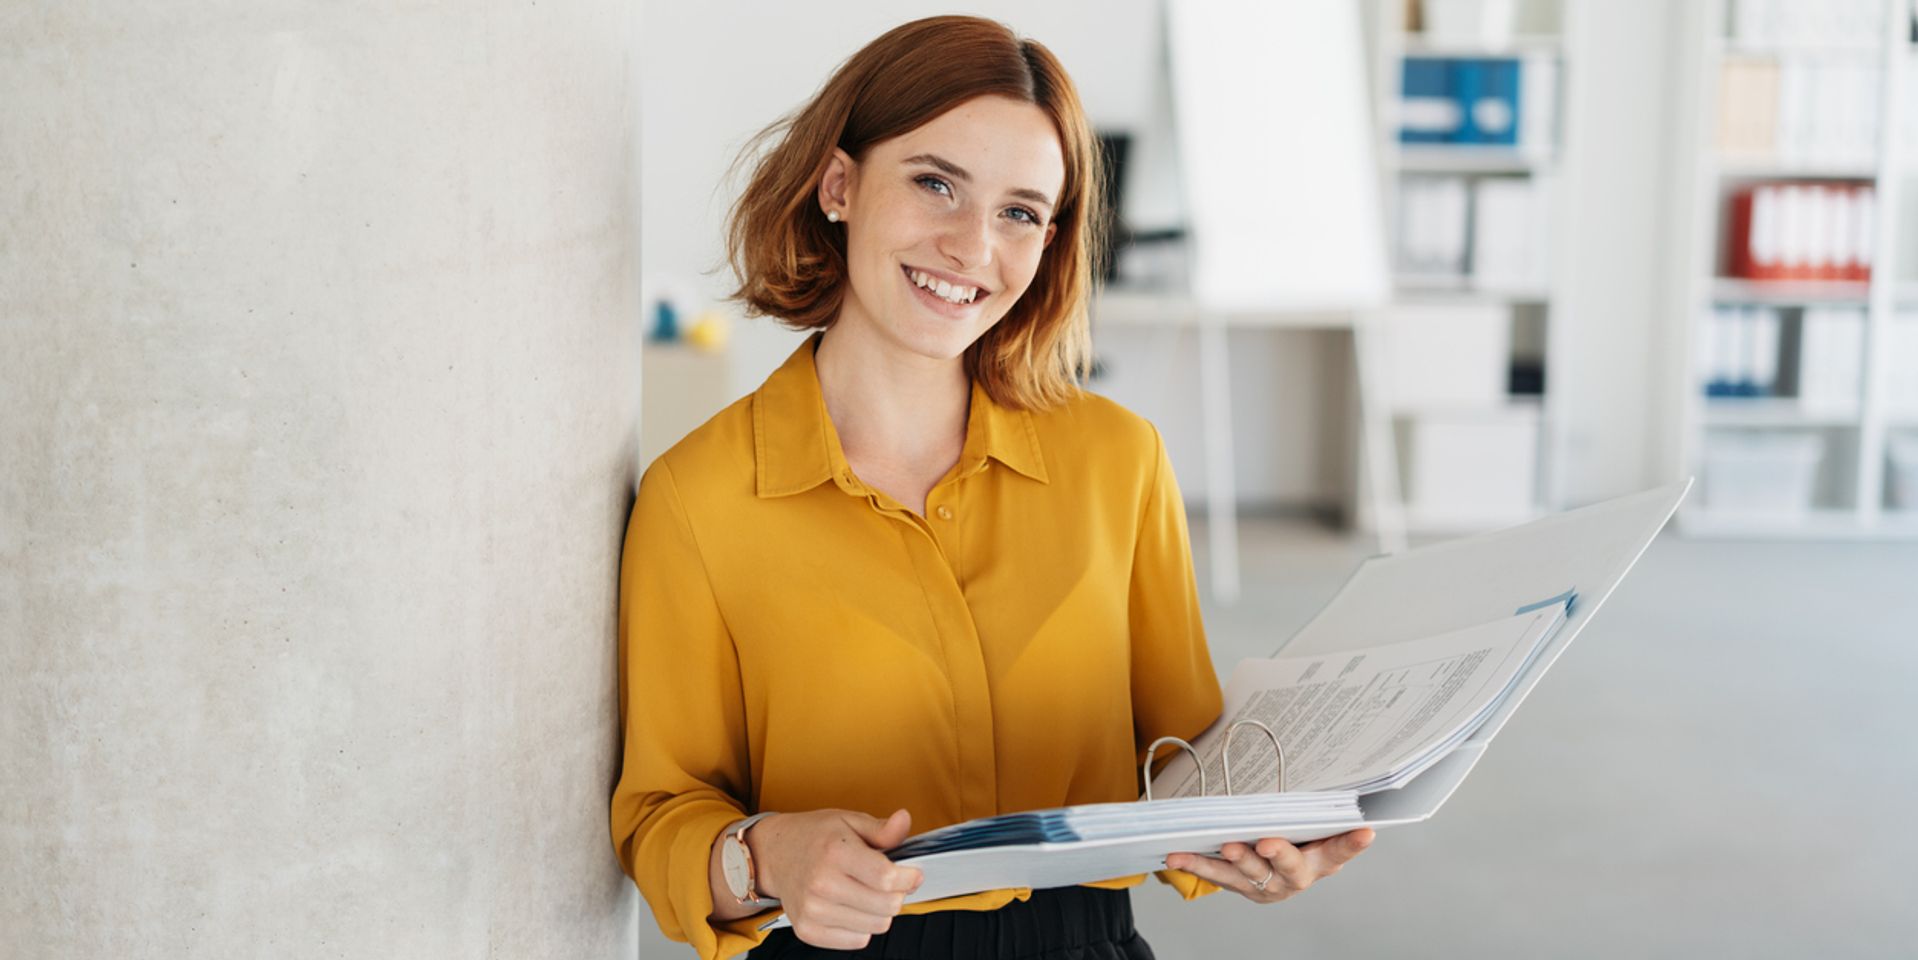 Attractive young office worker holding a large open binder as she looks at the camera with a sweet friendly smile